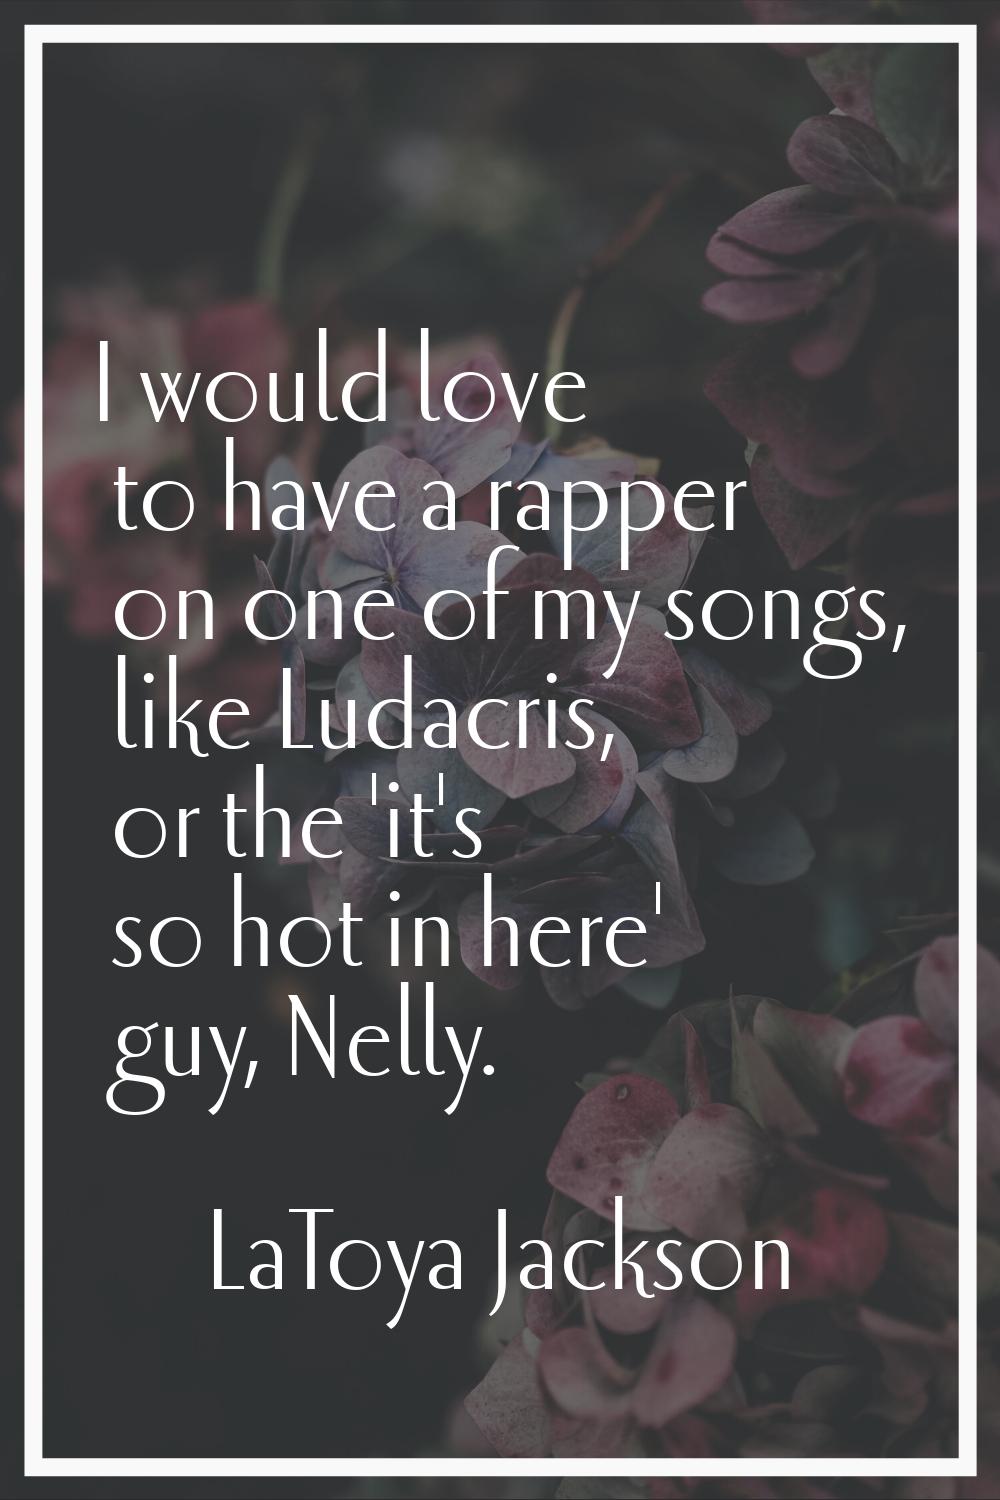 I would love to have a rapper on one of my songs, like Ludacris, or the 'it's so hot in here' guy, 